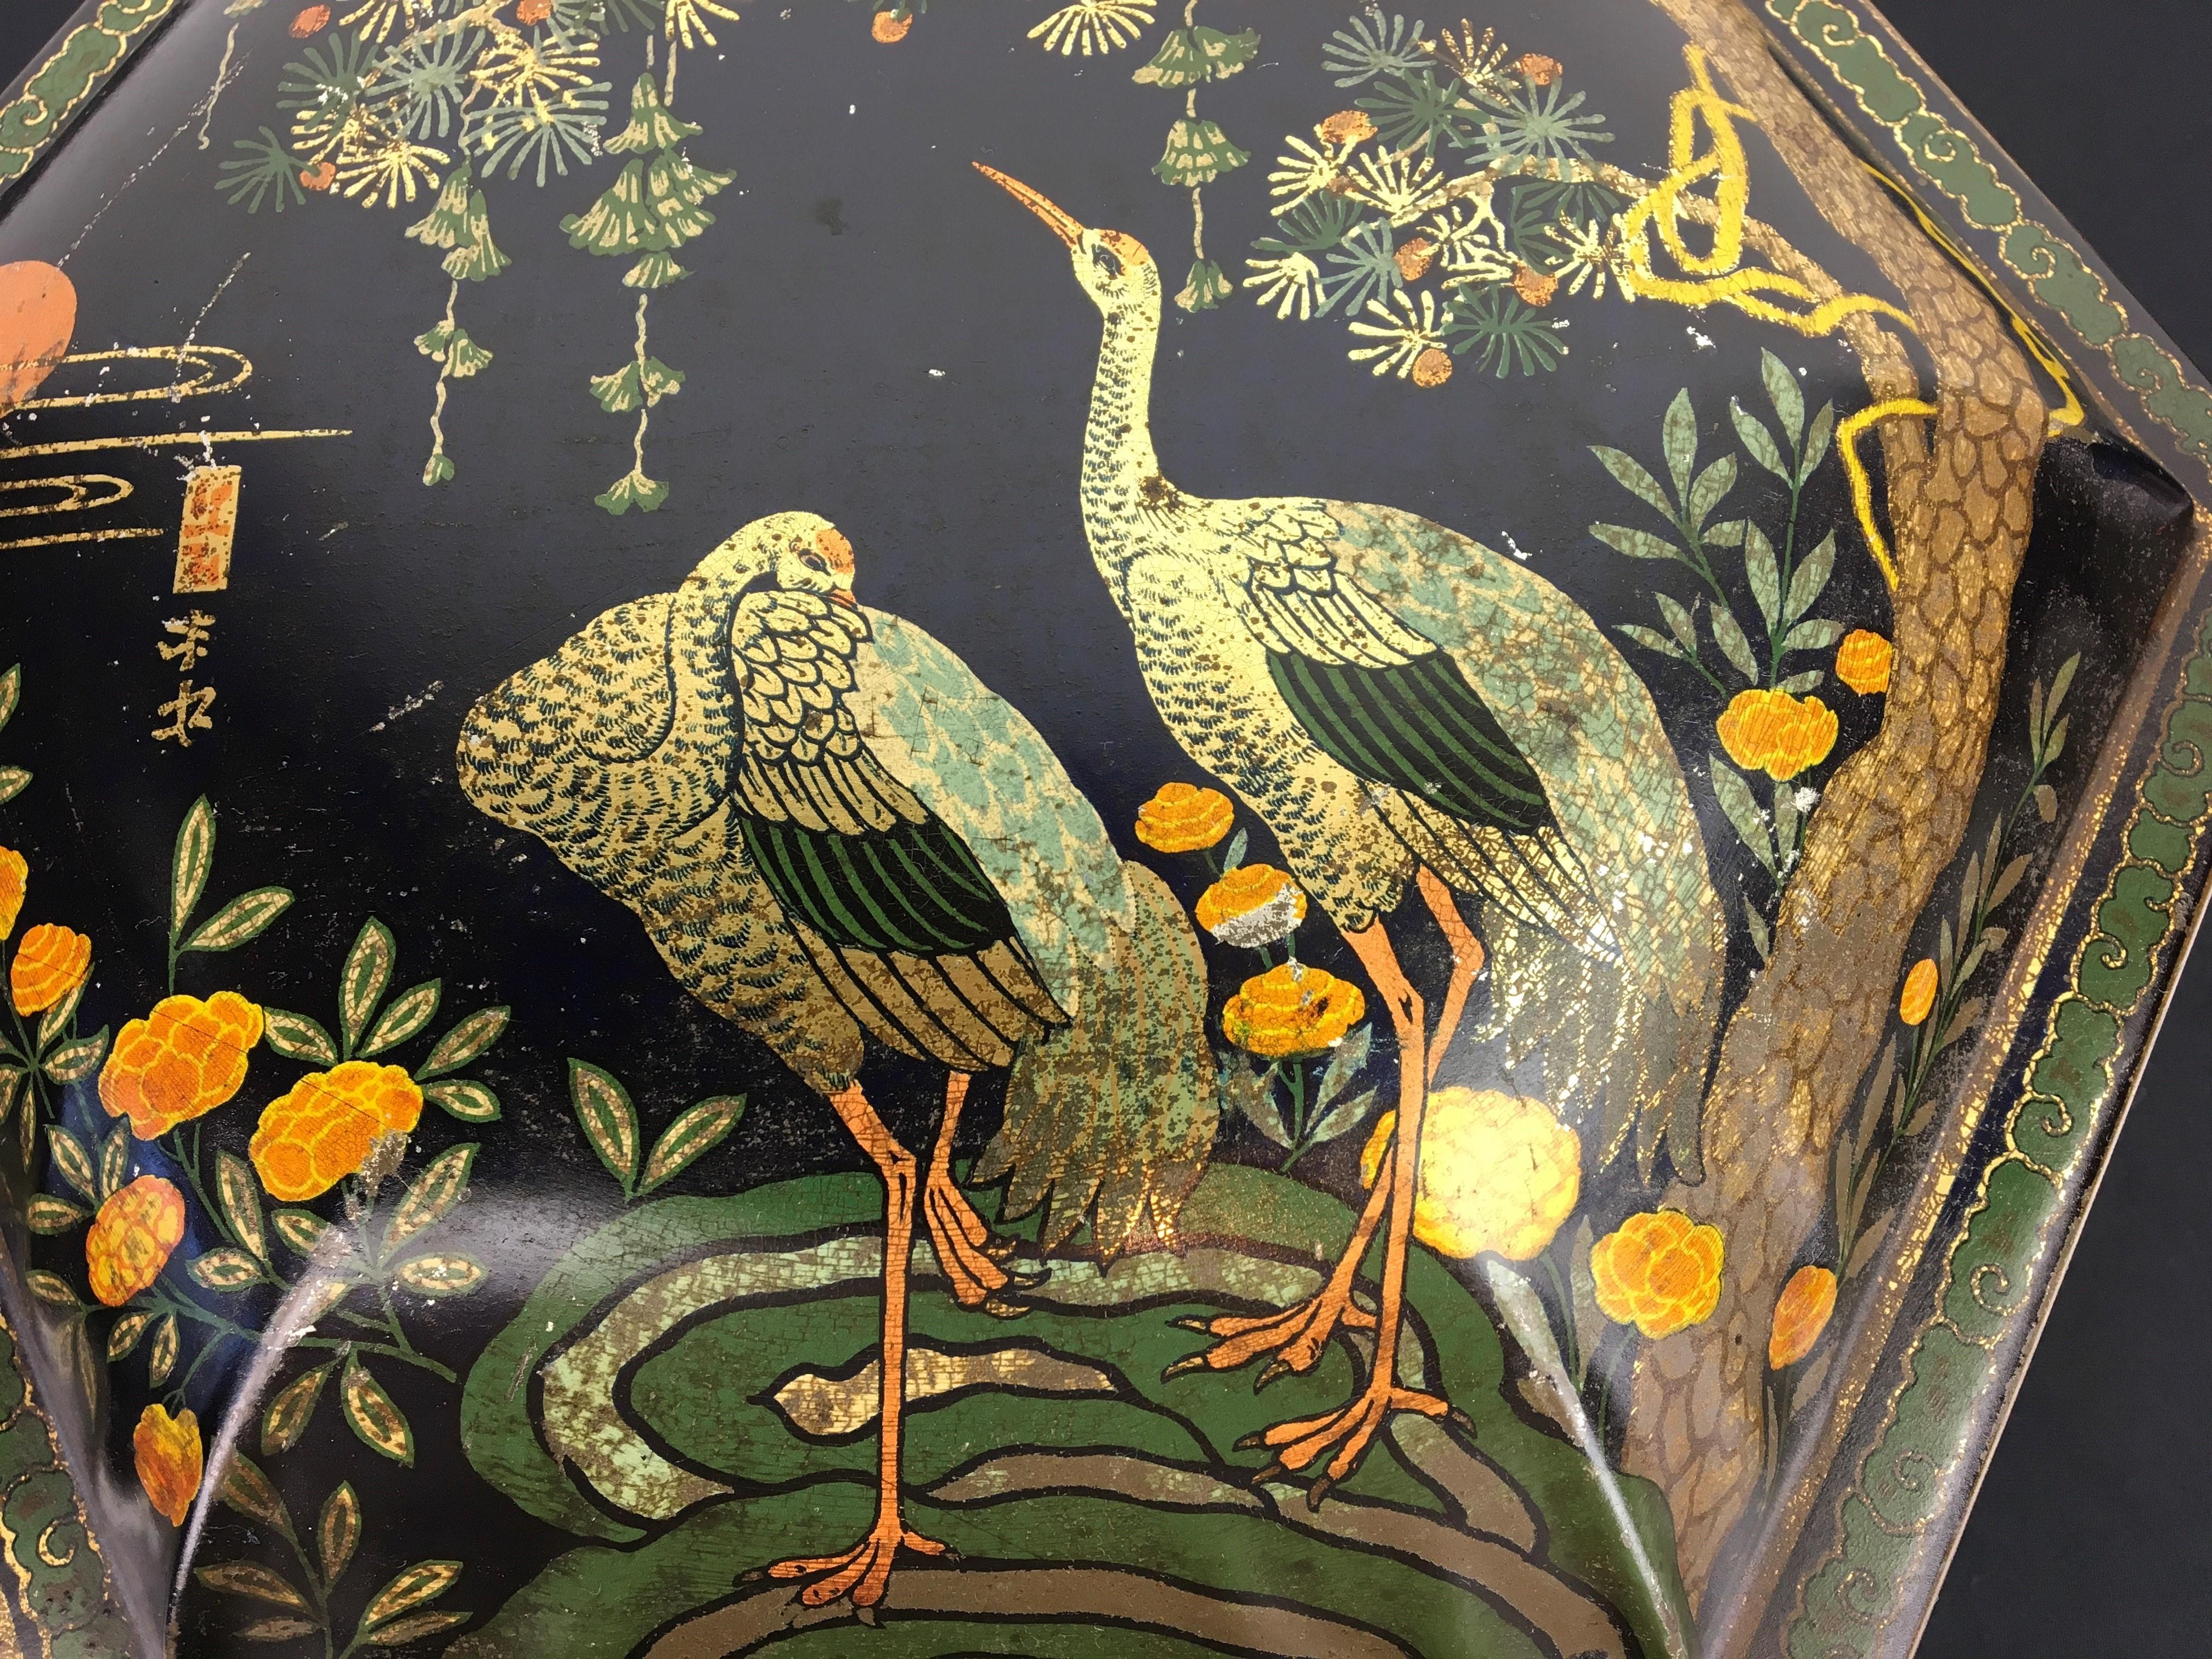 Antique tin in Asian style with cranes. 
This lithographic tin box with birds dates from the early 20th century.
It's a stylish and elegant antique metal storage tin in hexagonal shape with lid.
In dark blue color with a beautiful design in Asian